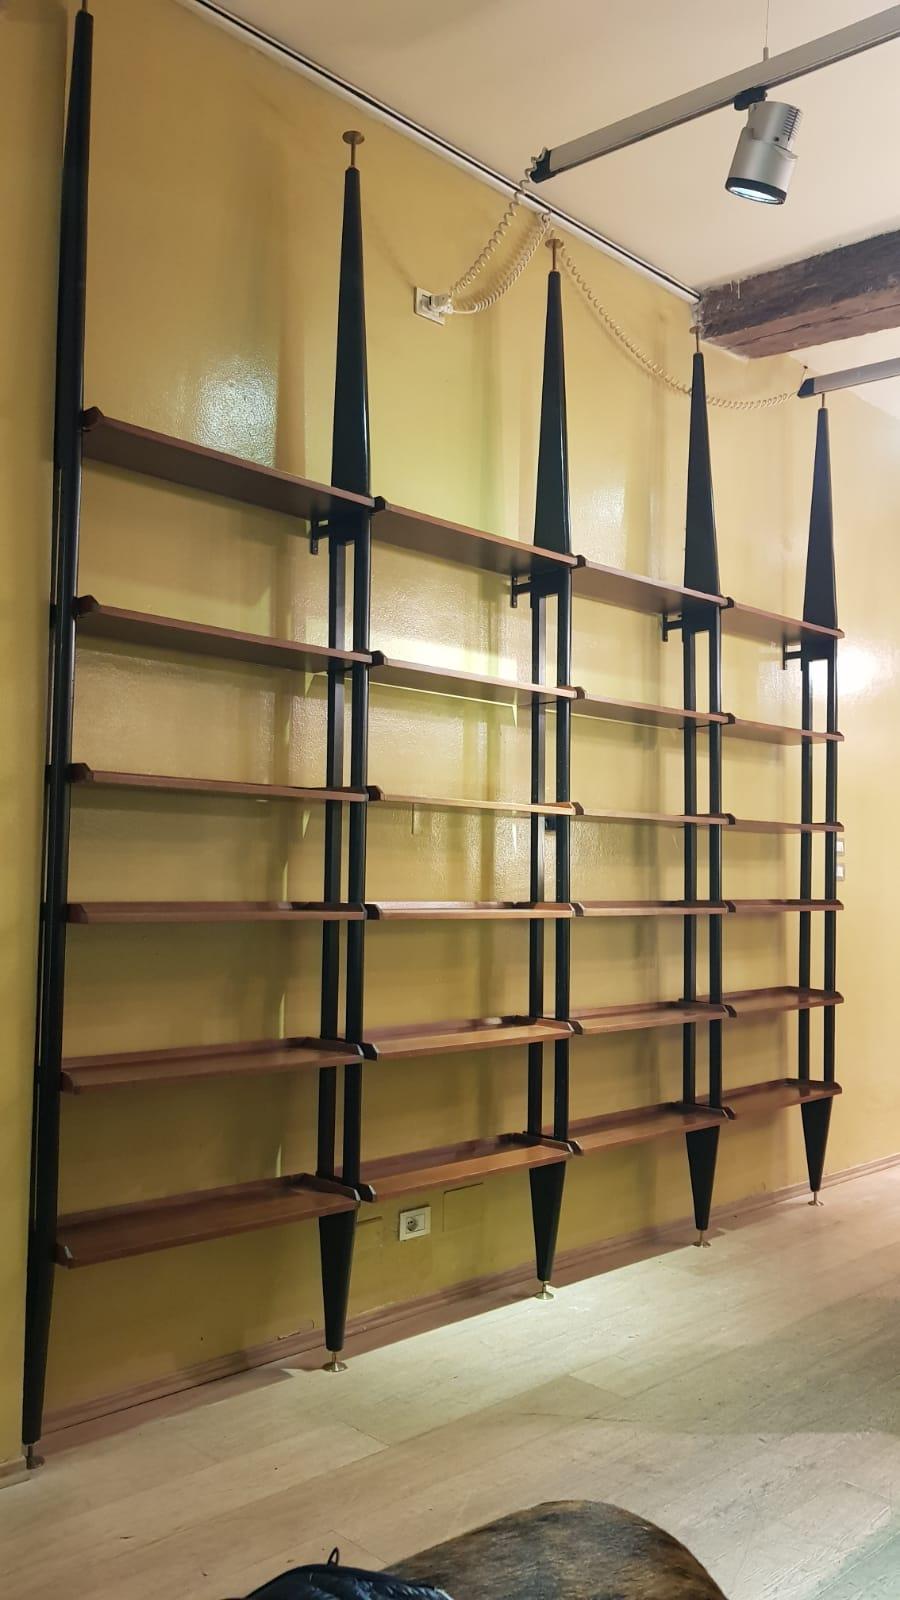 Two mahogany wood adjustable shelves black metal Uprights, Albini's style. Bookcases, from Italy from 1950s period. The bookcases come from one bigger original structure (still available and possible) see pictures.
Appreciable for its size, it is